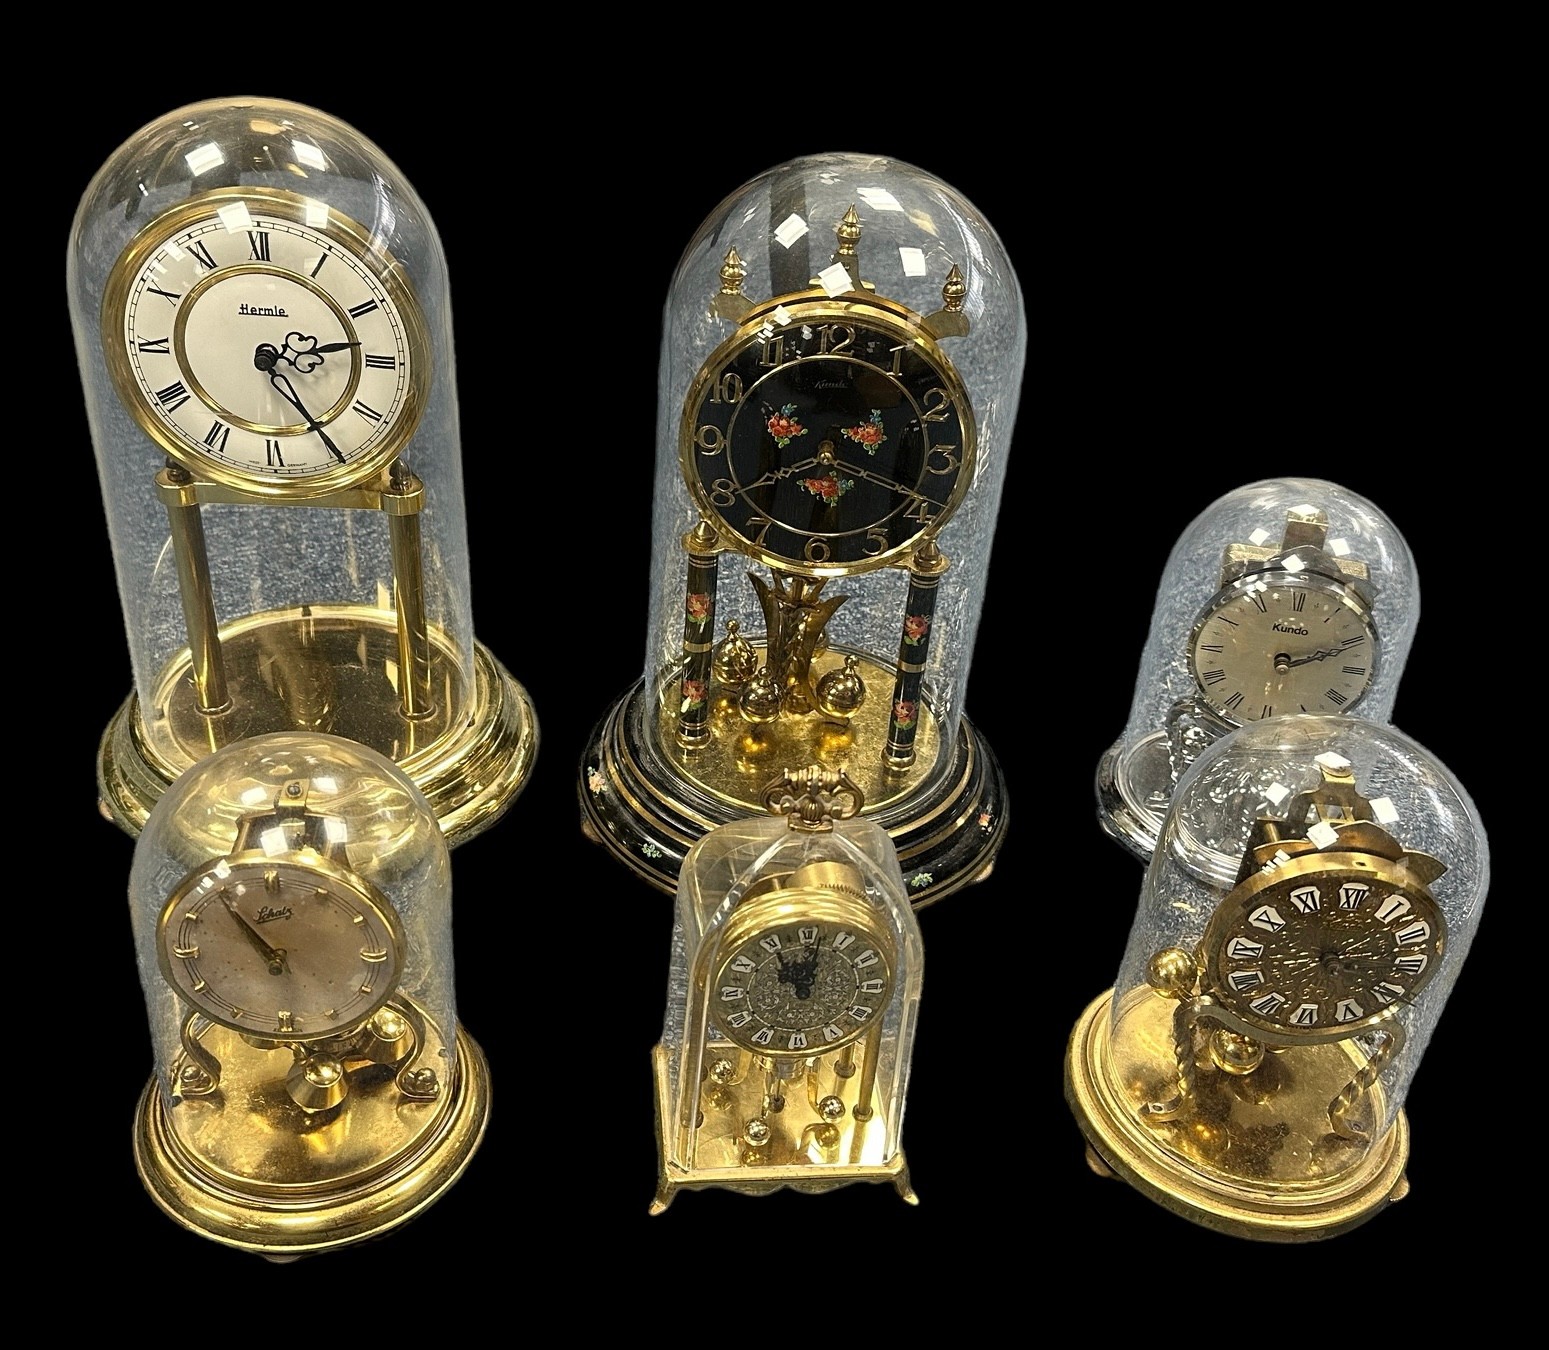 Anniversary clock collection, generally excellent to good, with Kundo, Hermle, etc. Unchecked for